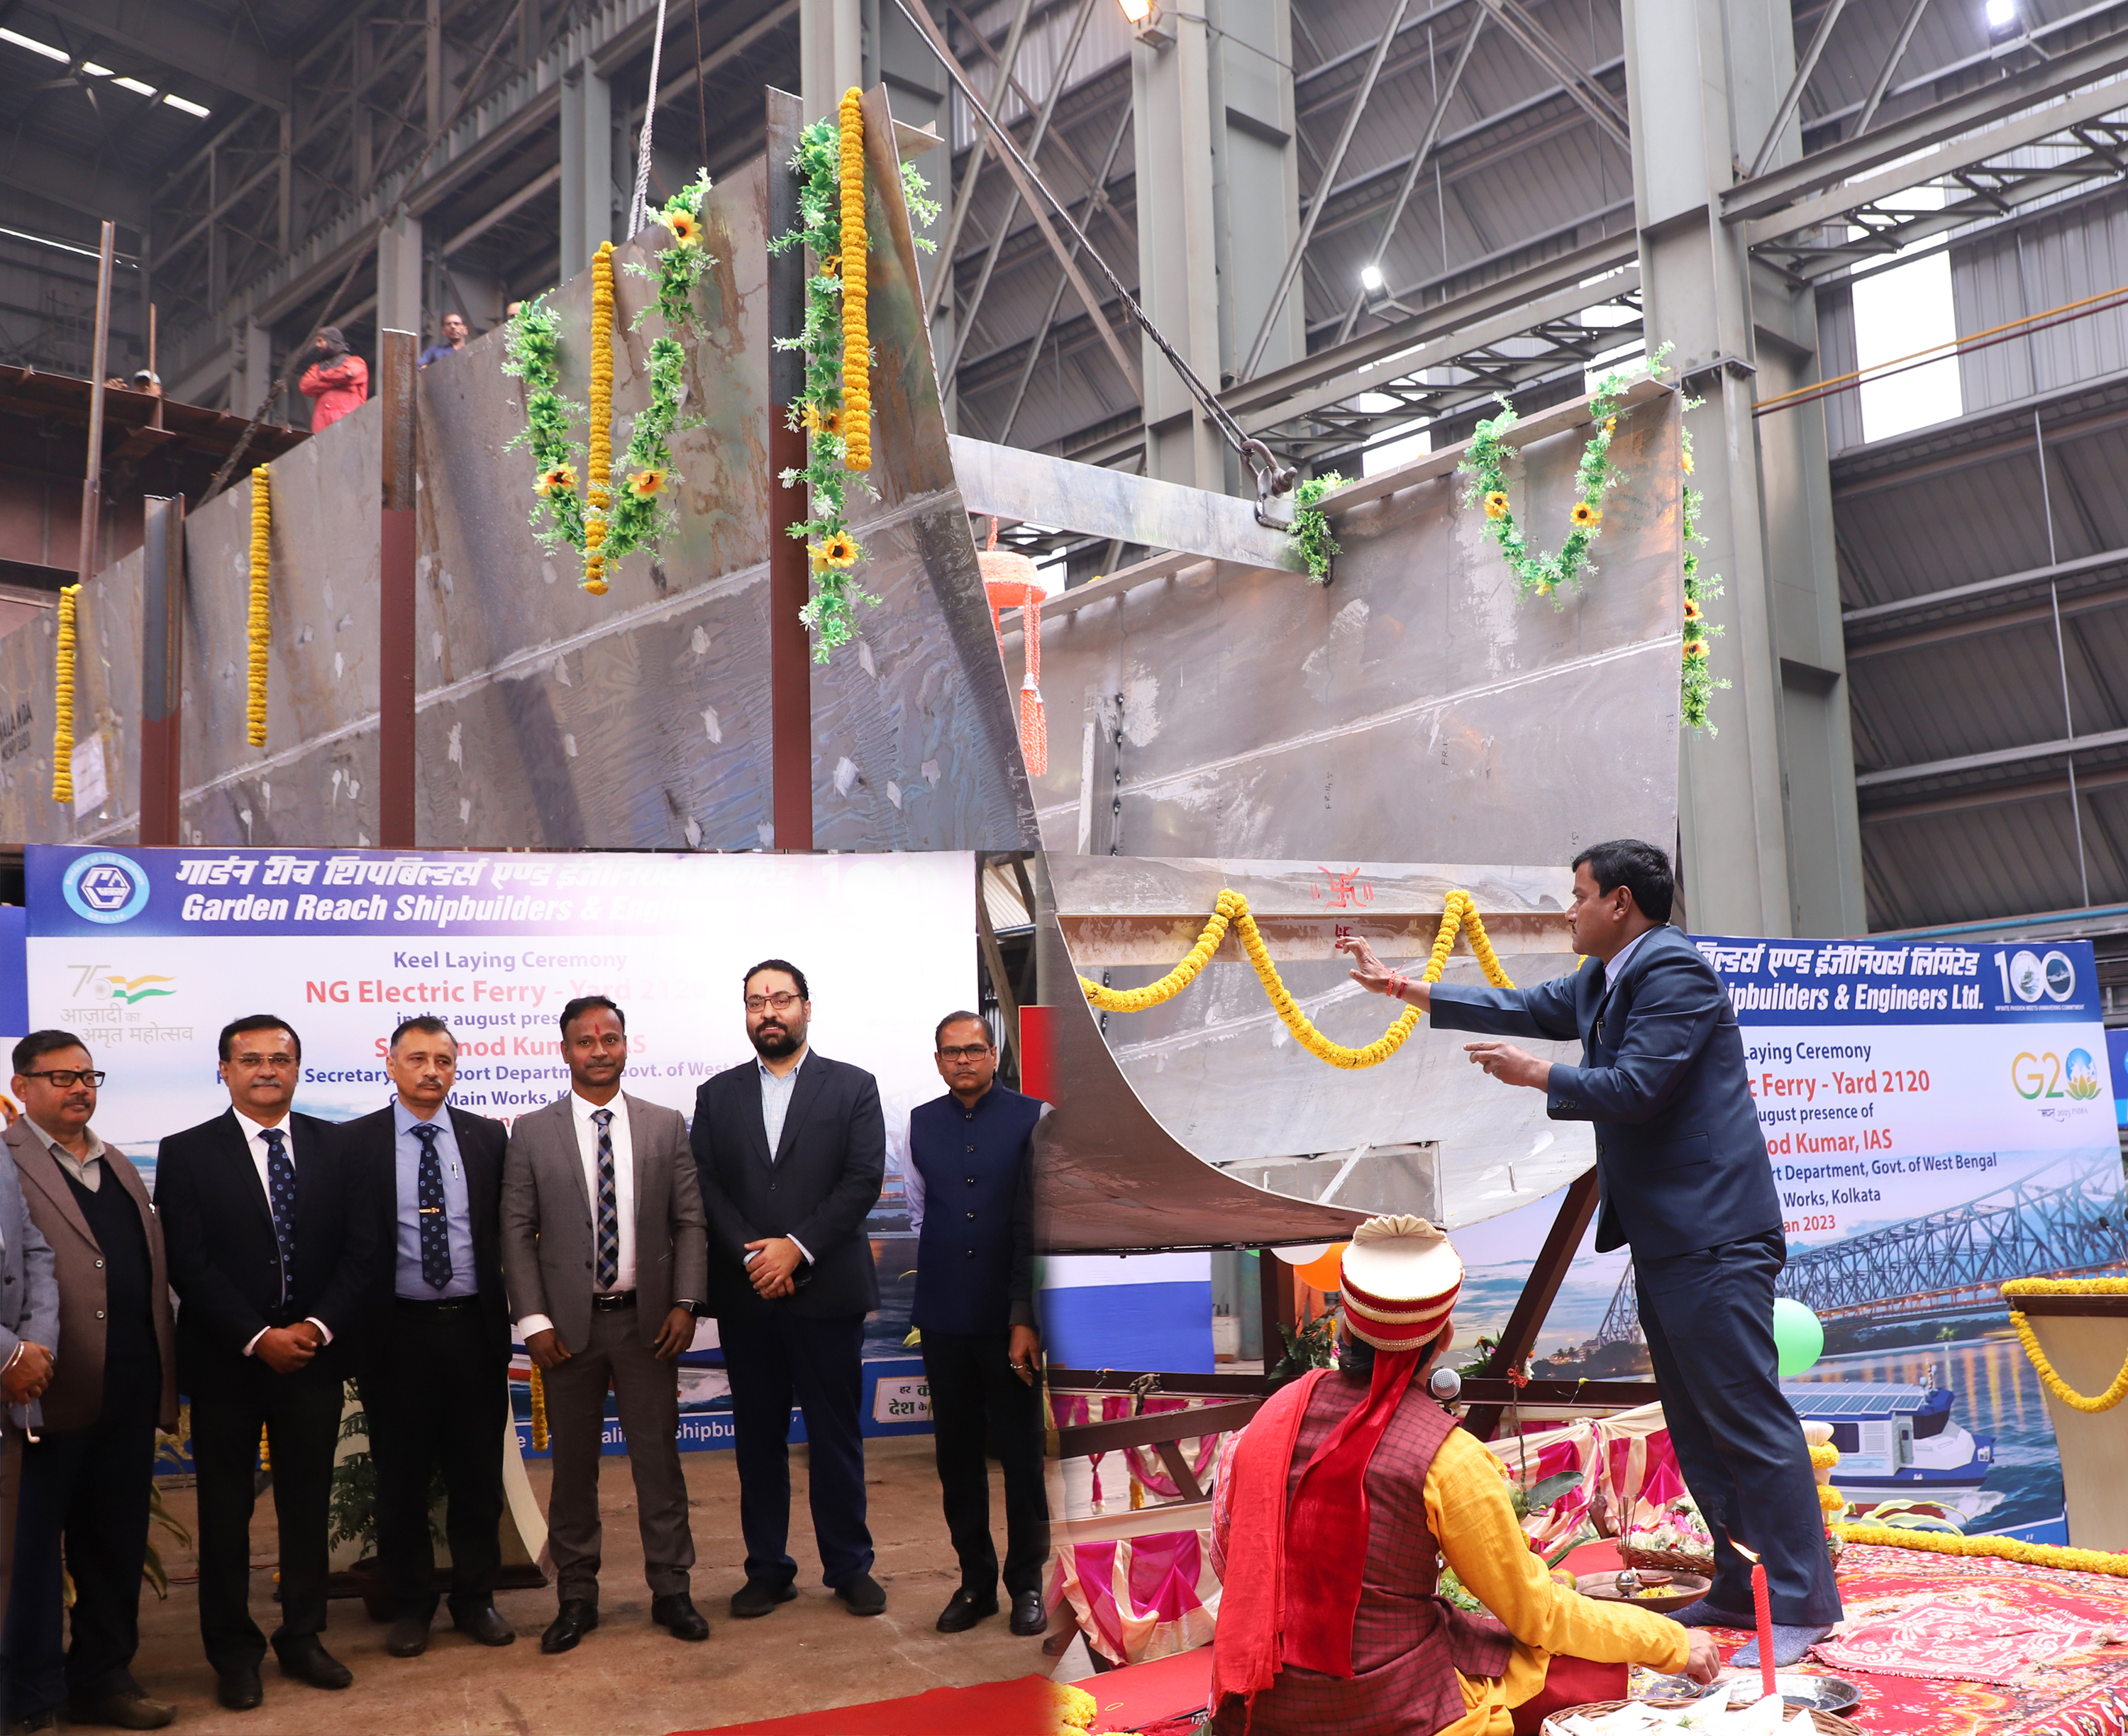 Keel laying for NG Electric Ferry